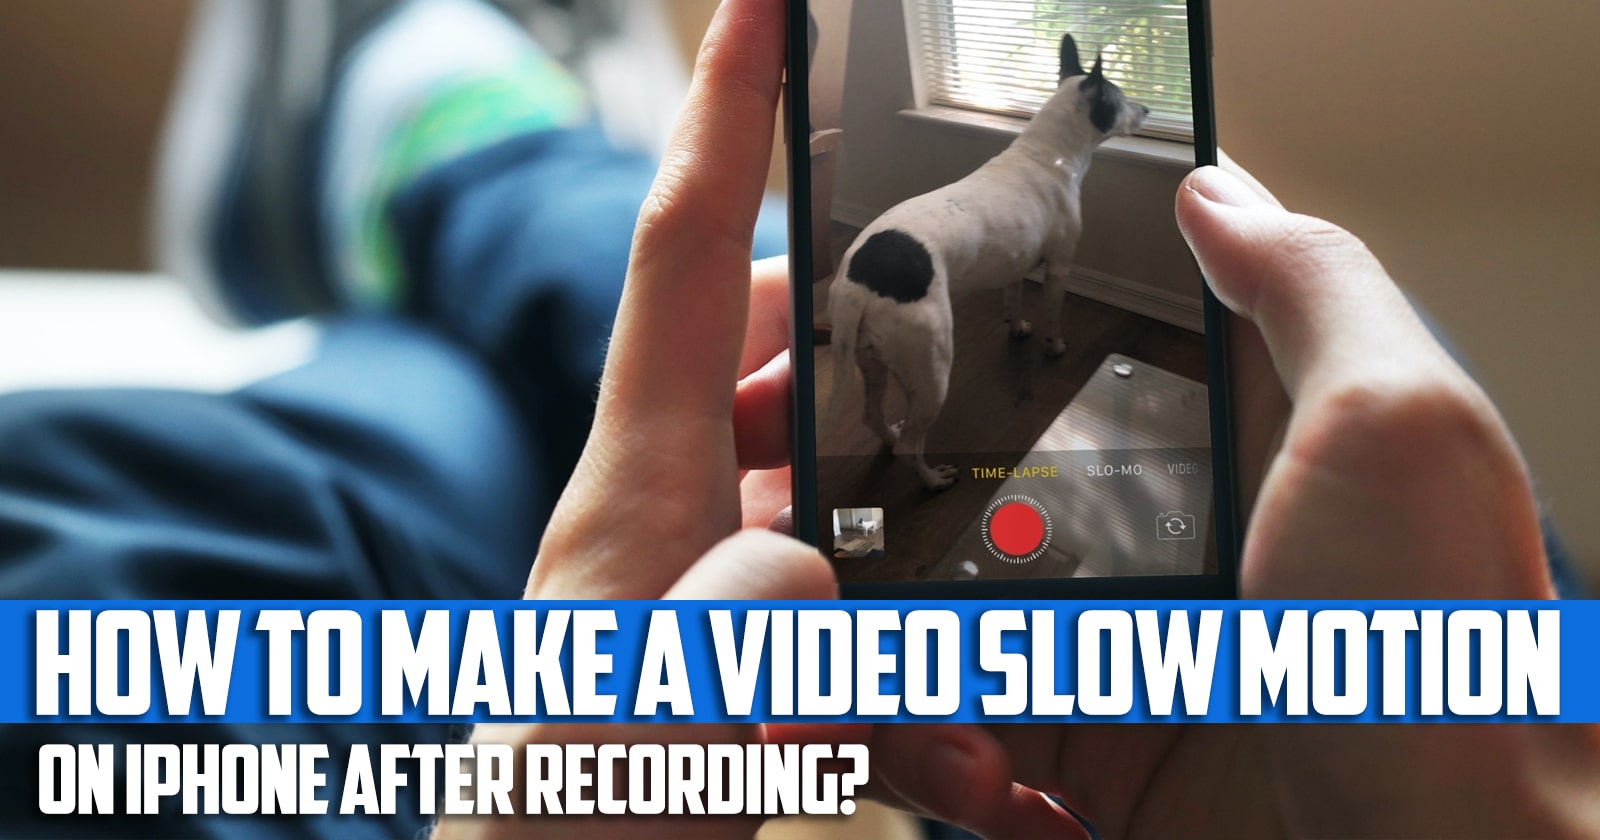 How to make a video slow motion on iPhone after recording?